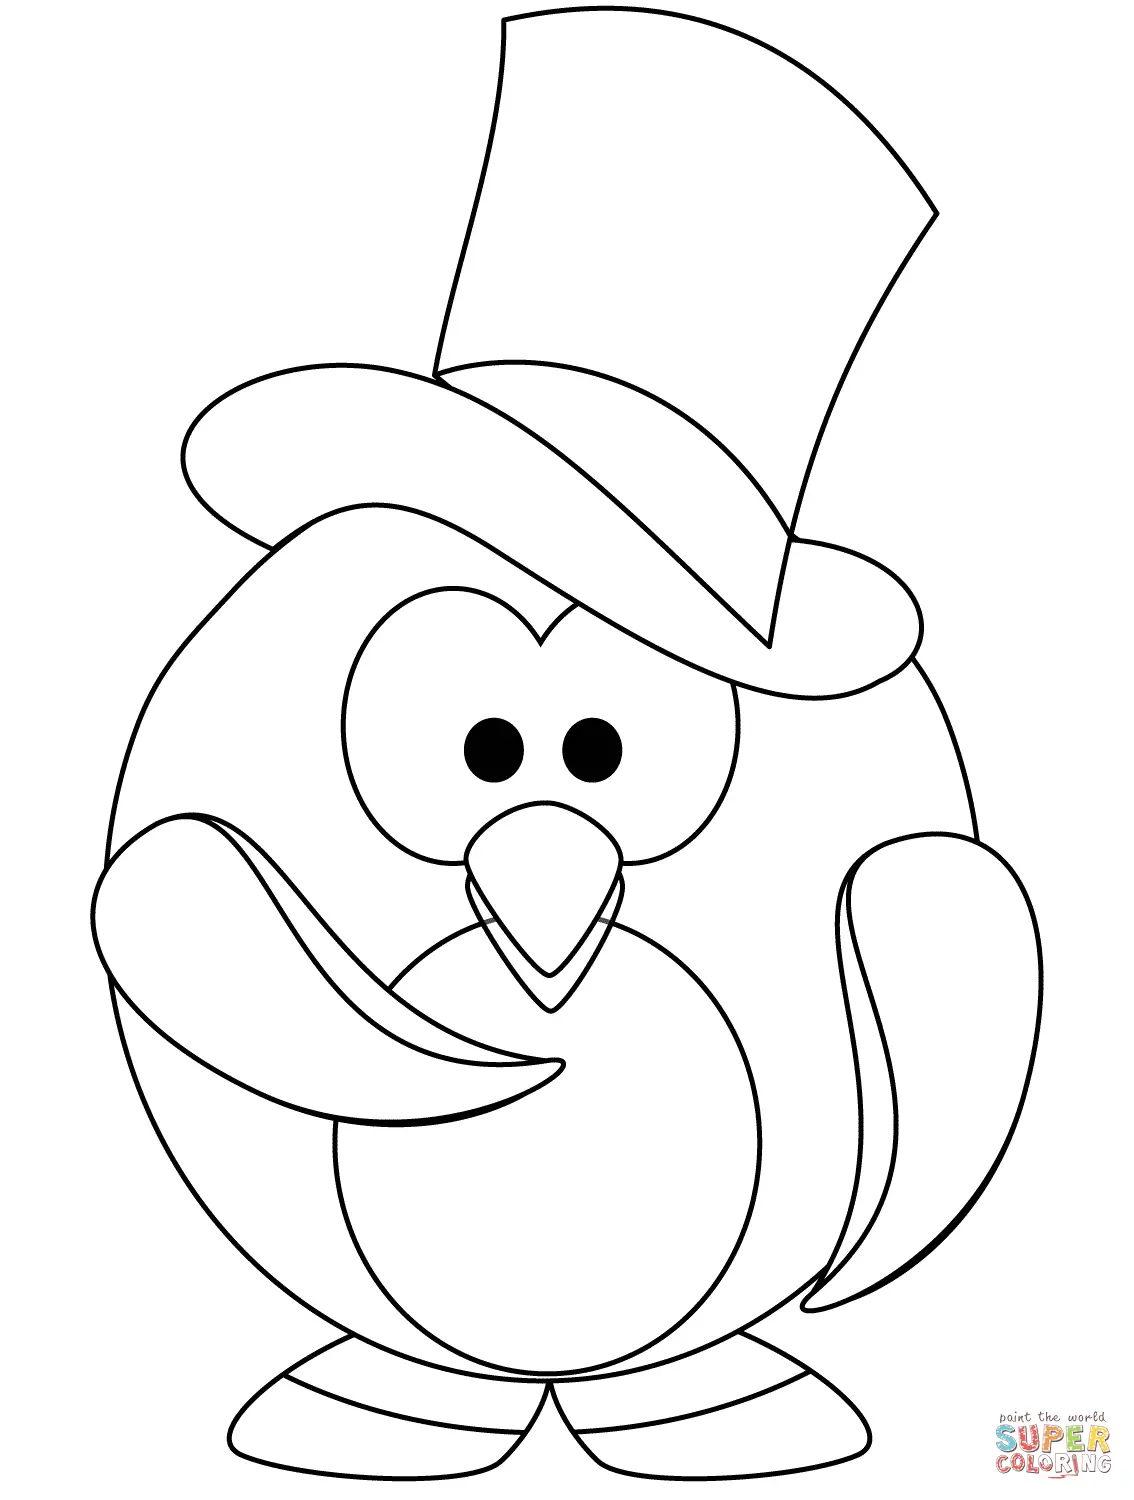 Cute Penguin Coloring Pages